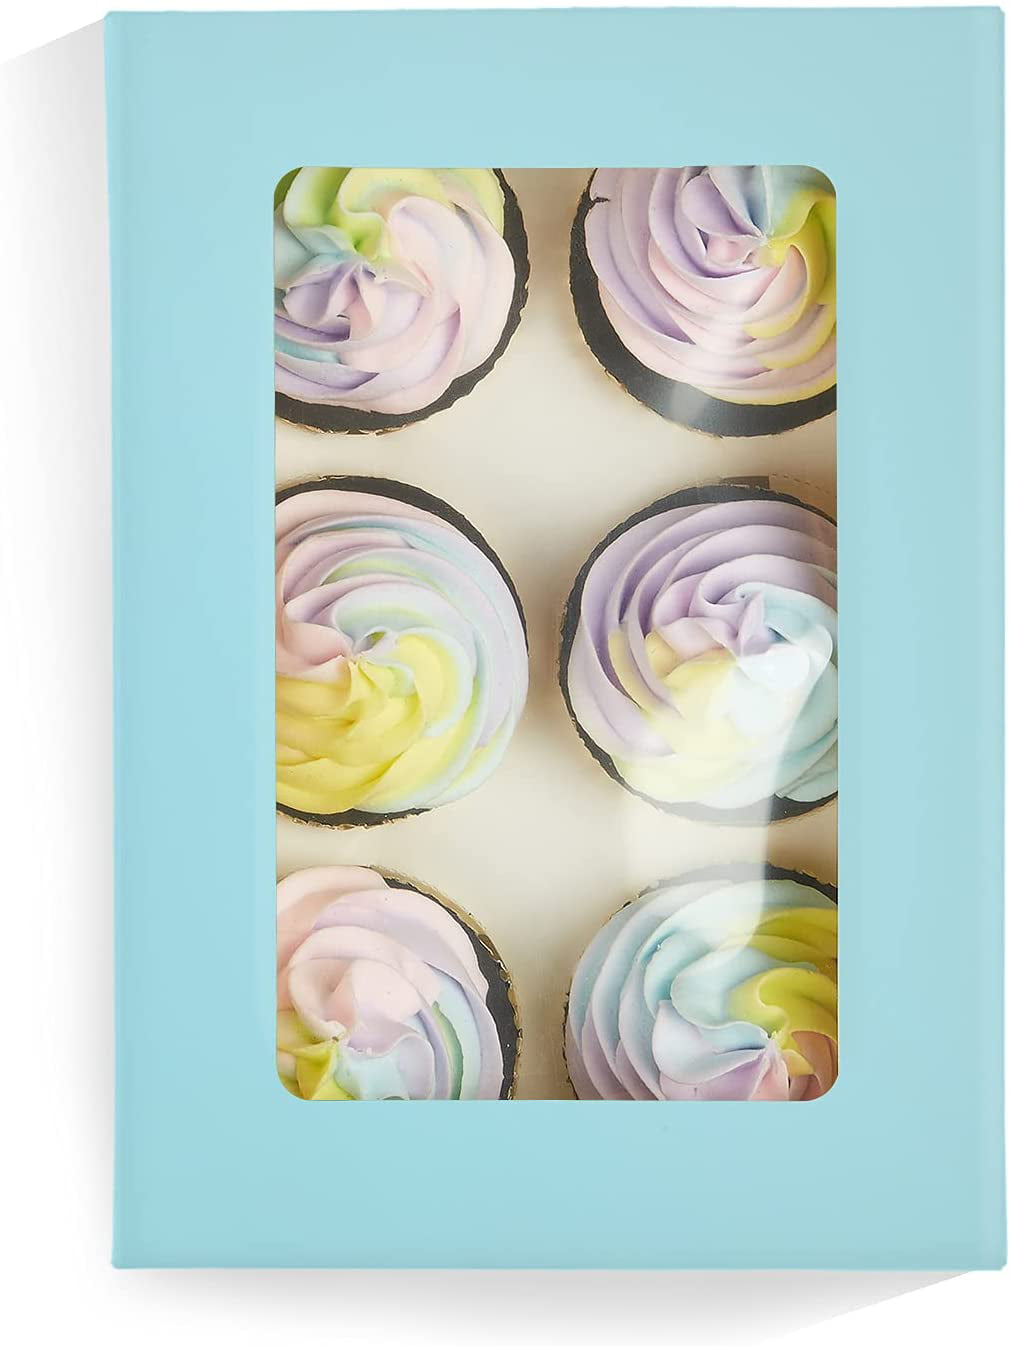 Yotruth 30 Packs Cupcake Boxes Holders 6 Cupcakes,Blue Bakery Boxes with Window 9.4 x 6.1 x 3.0 Cupcake Carriers Containers 